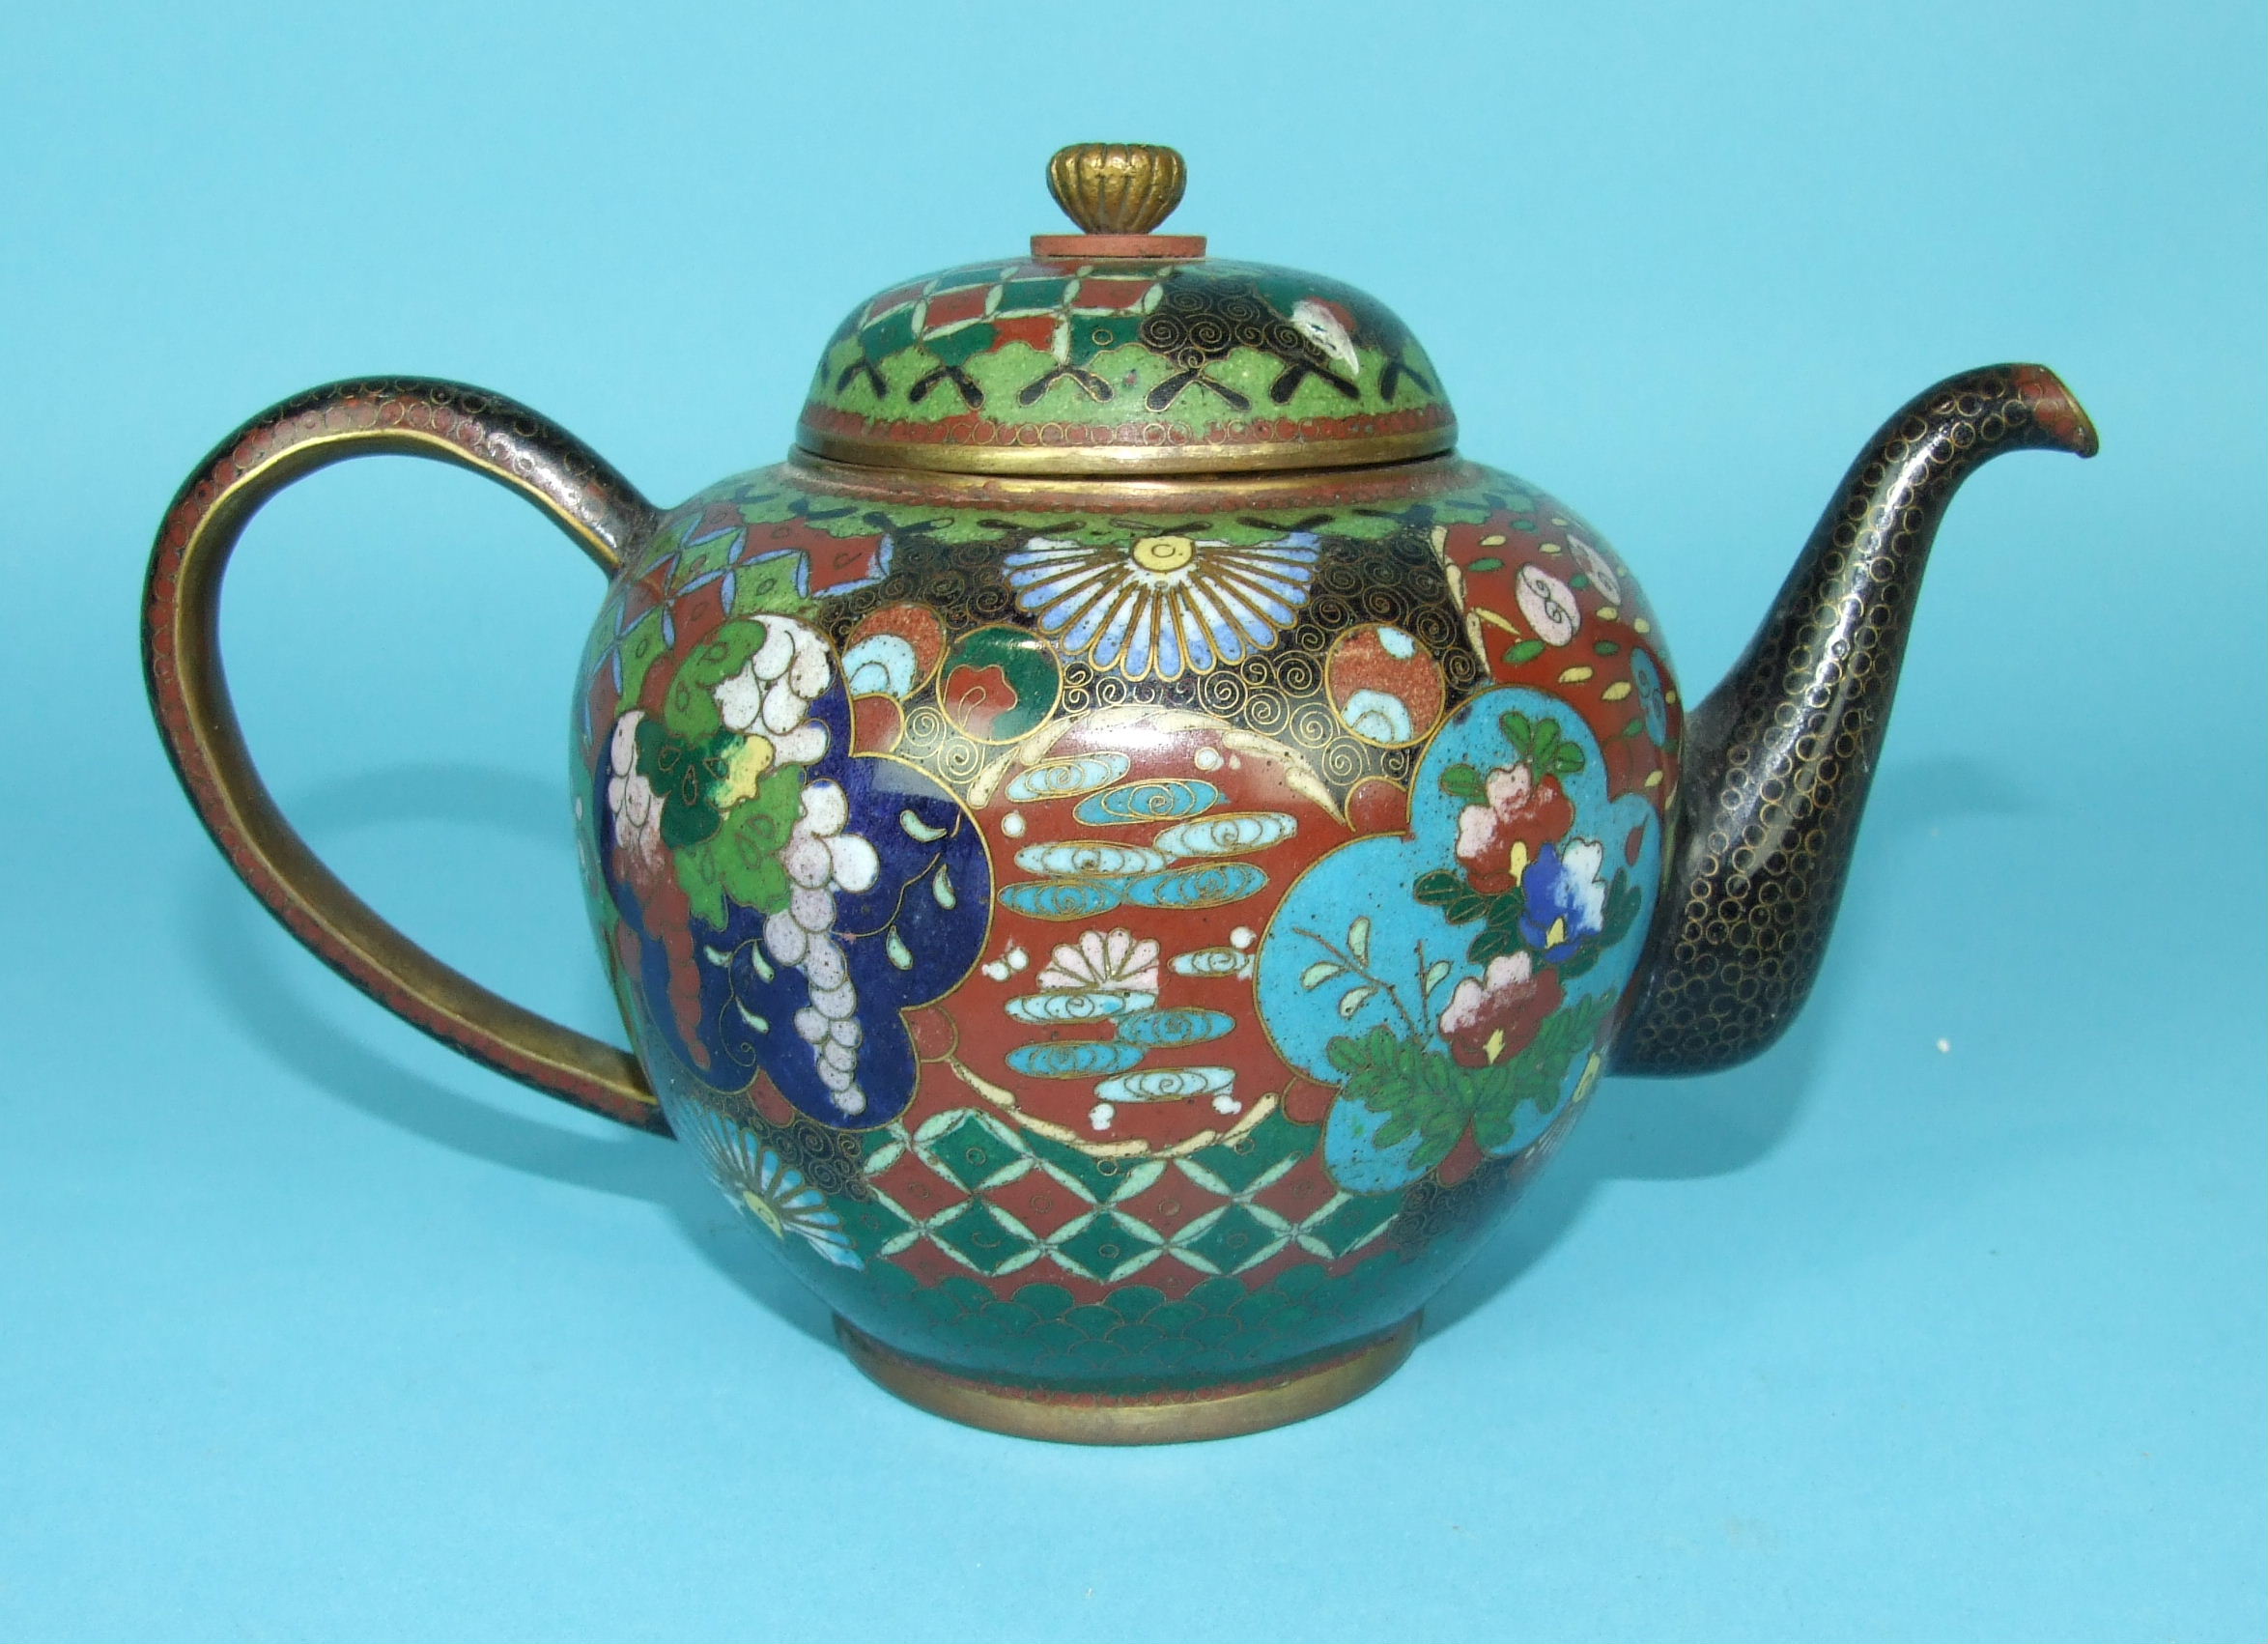 A 19th century Chinese cloisonné teapot and cover decorated with panels of flowers, on a brocade